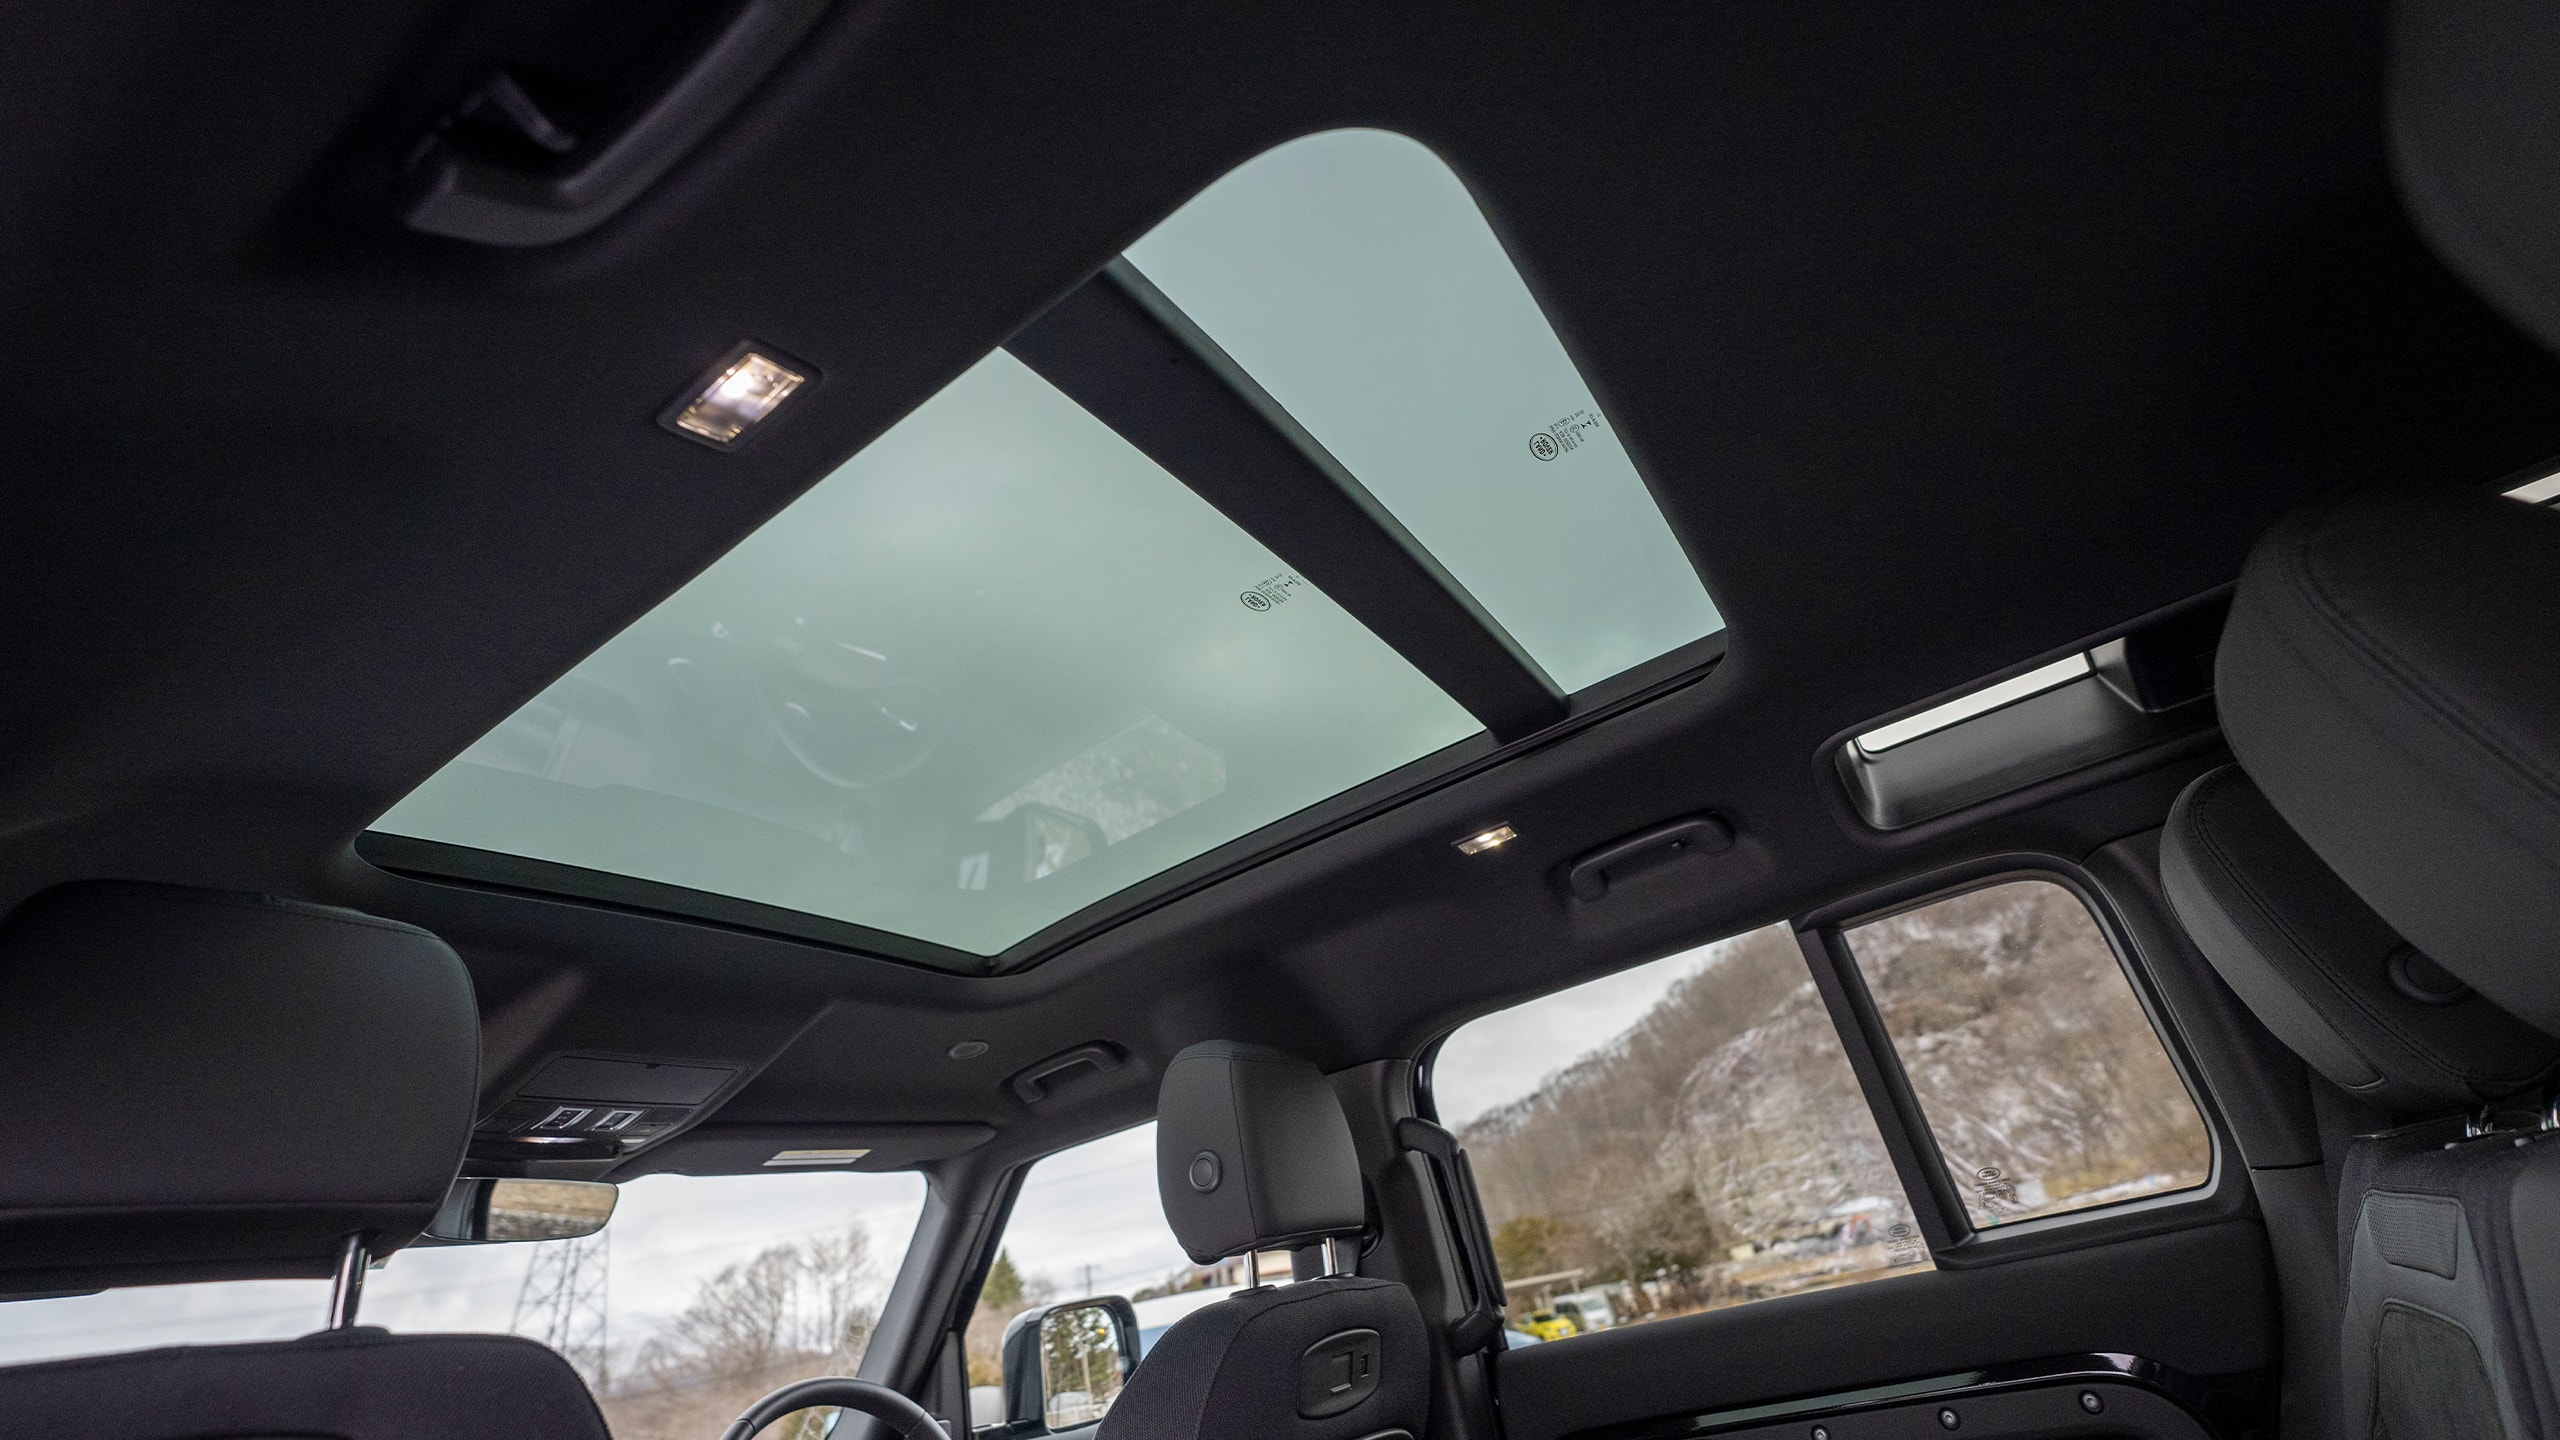 Sunroof View of Defender